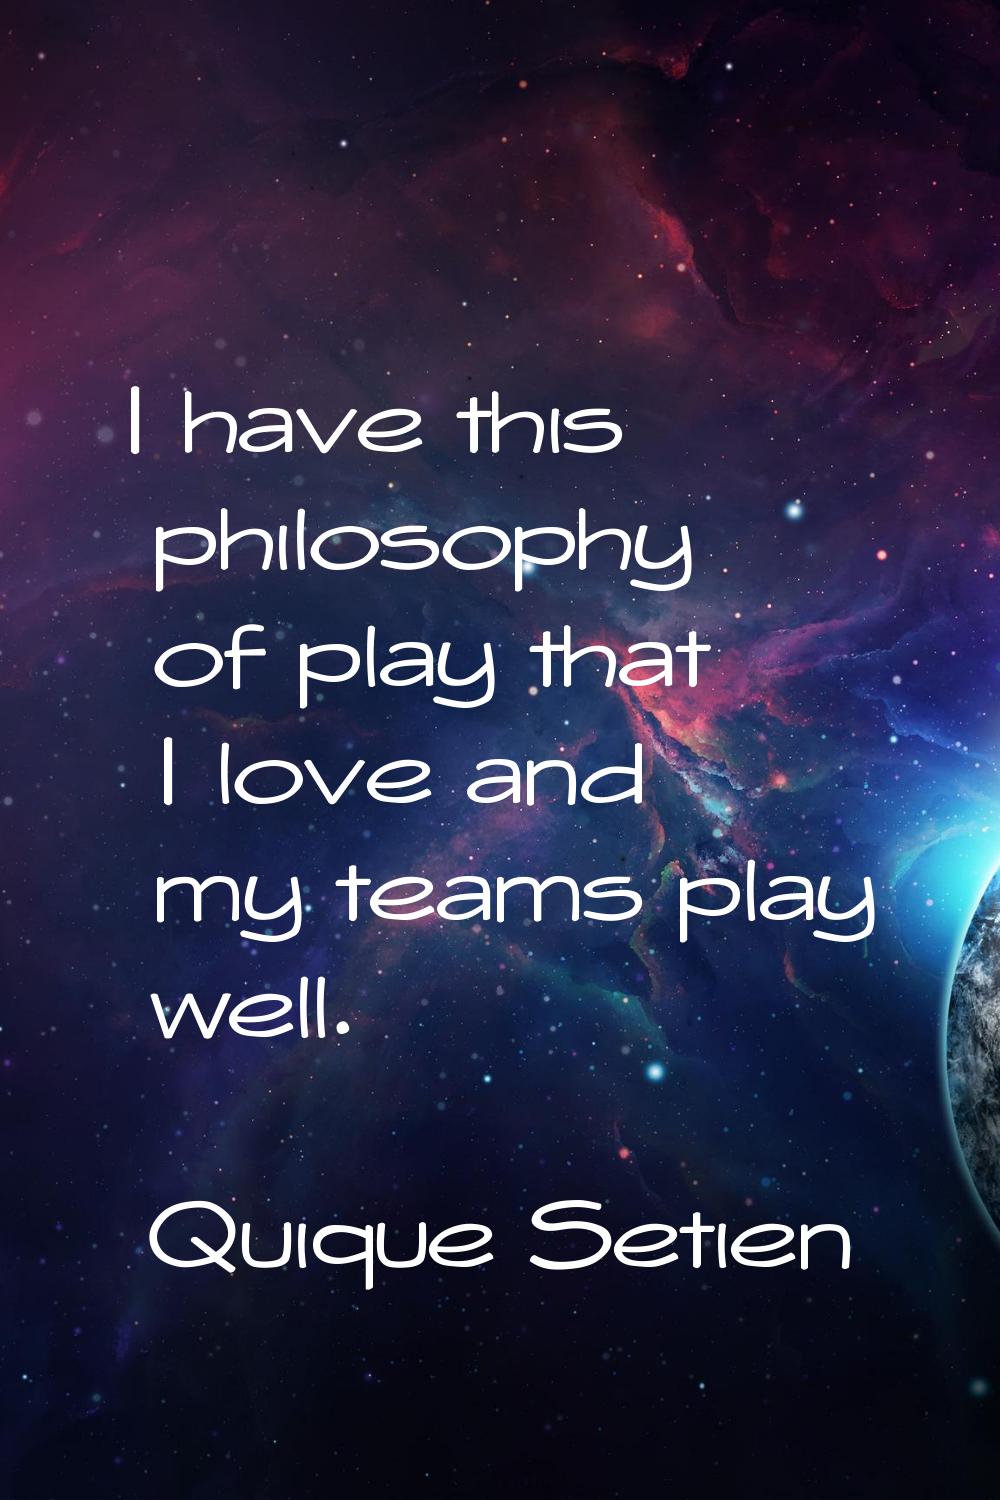 I have this philosophy of play that I love and my teams play well.